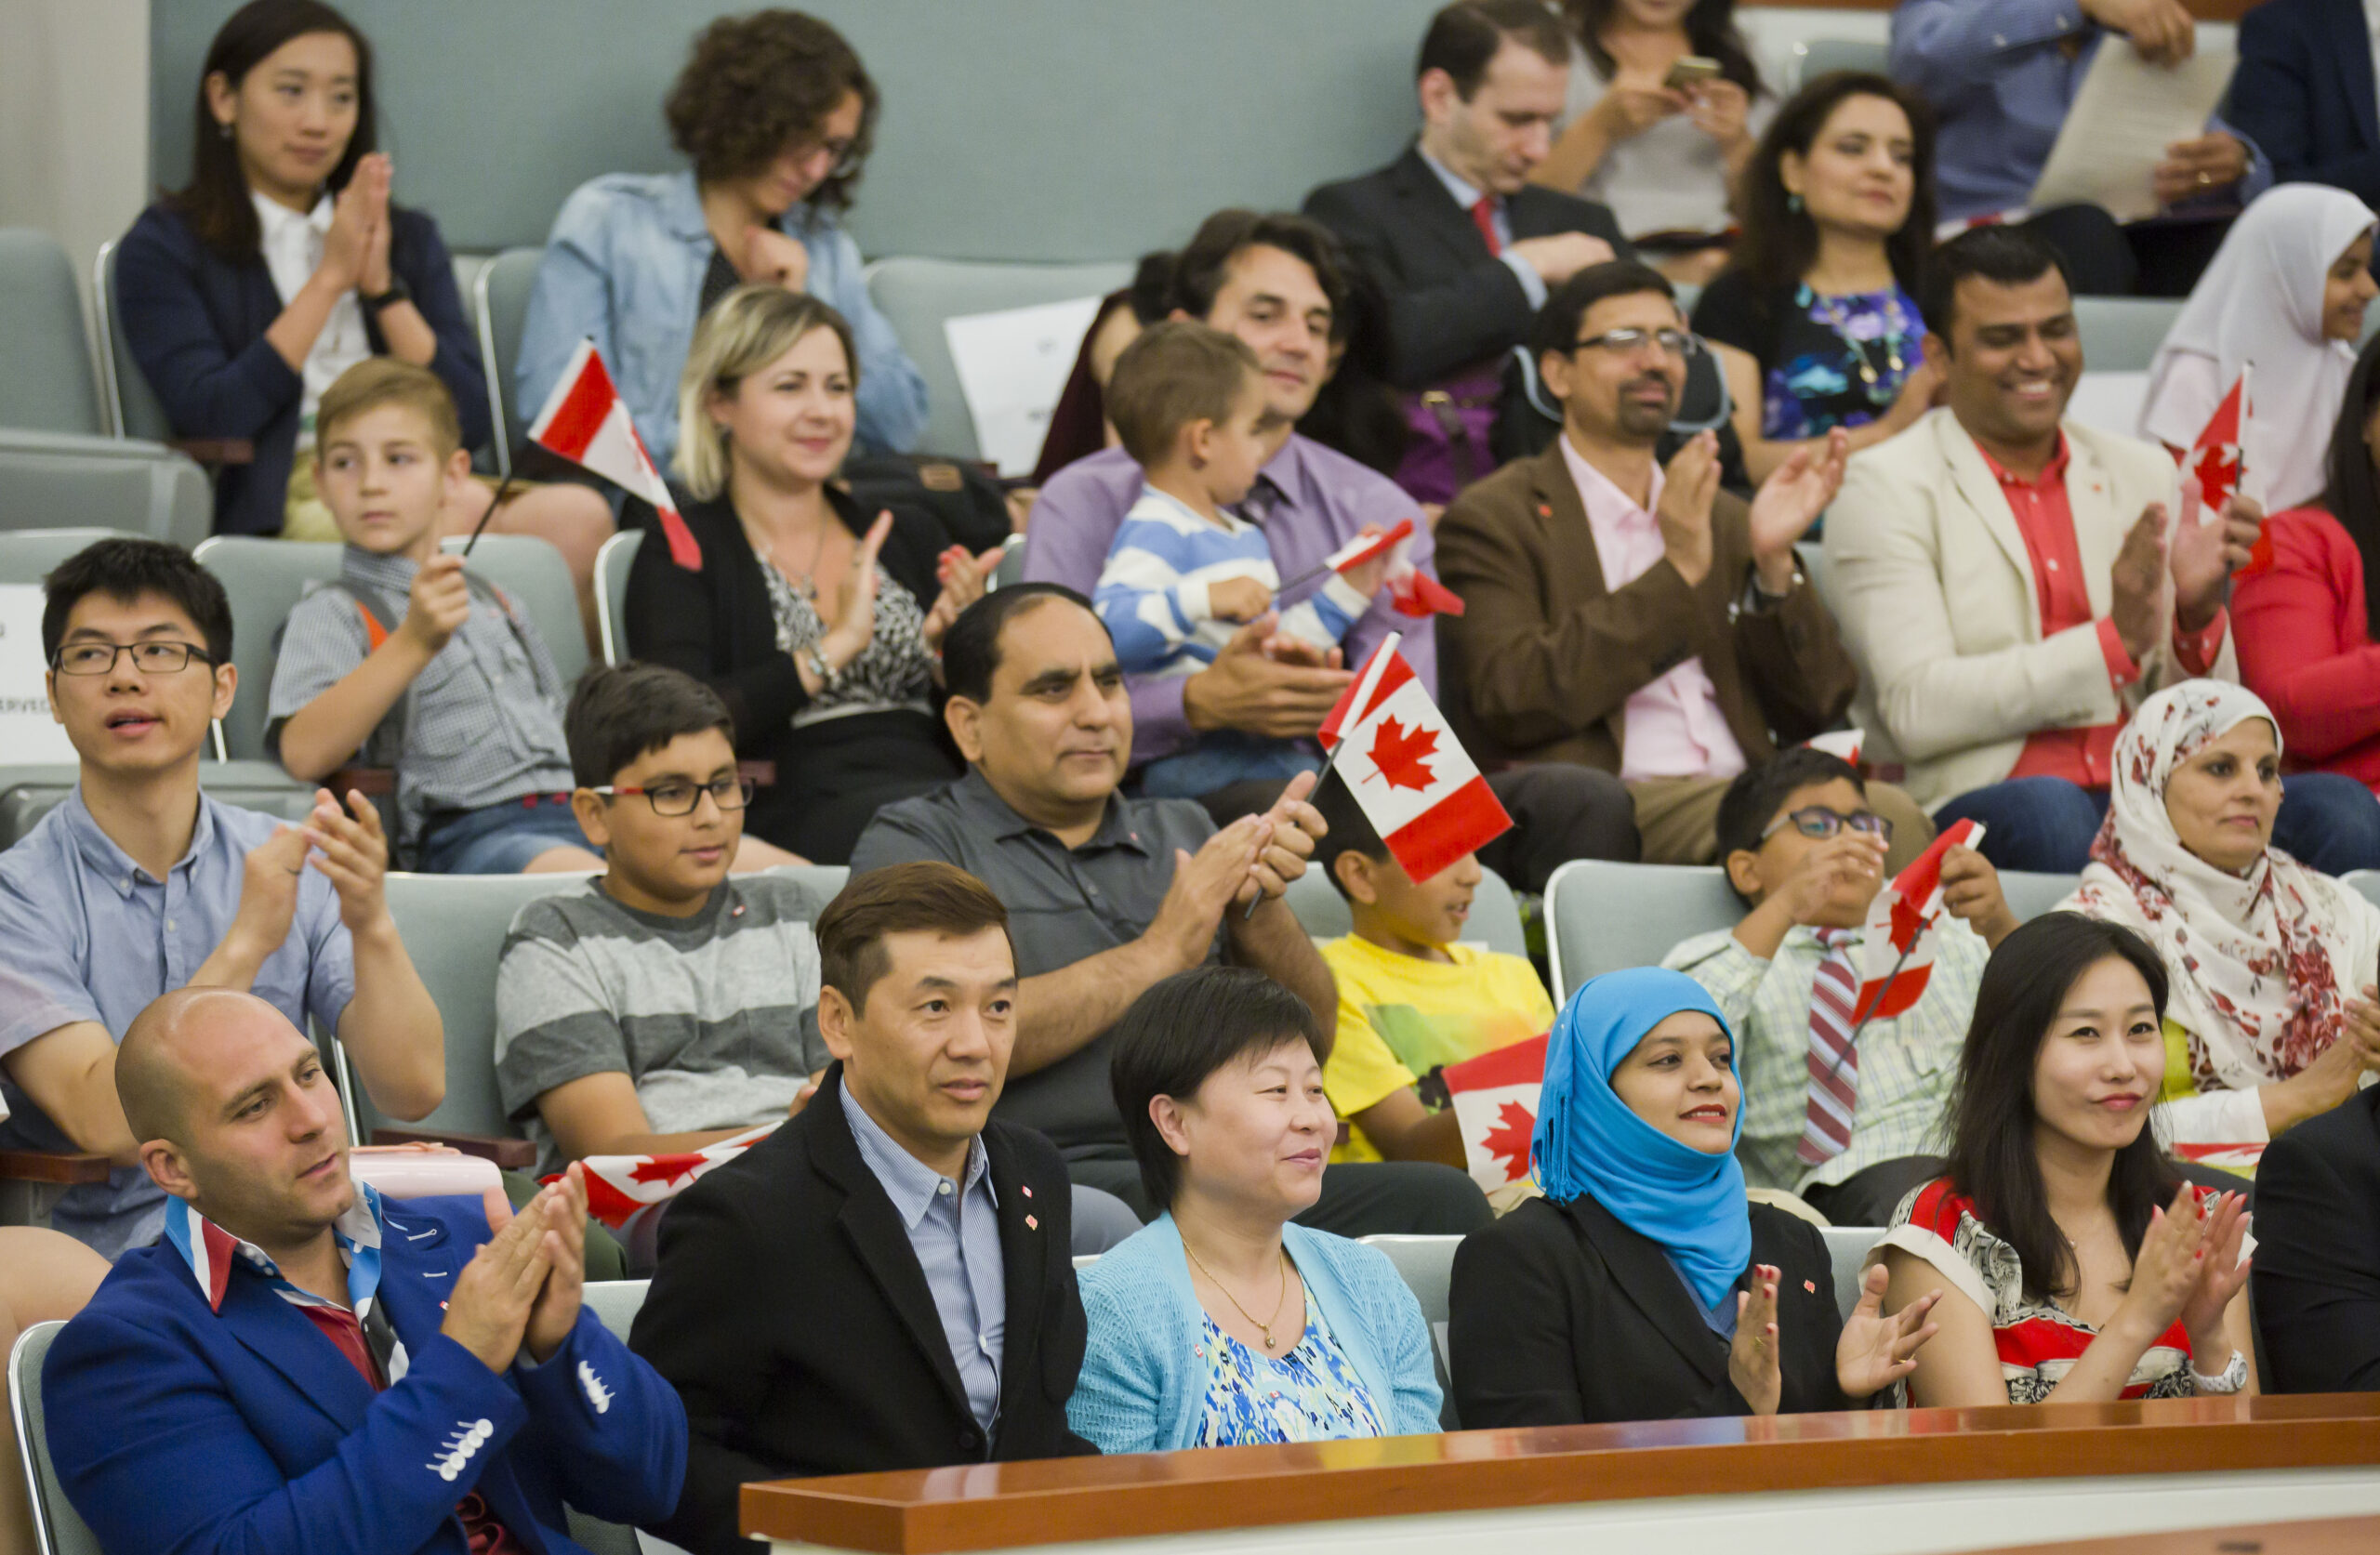 Newcomes wait to take their oath at a citizenship ceremony in Markham, Ont. in 2016